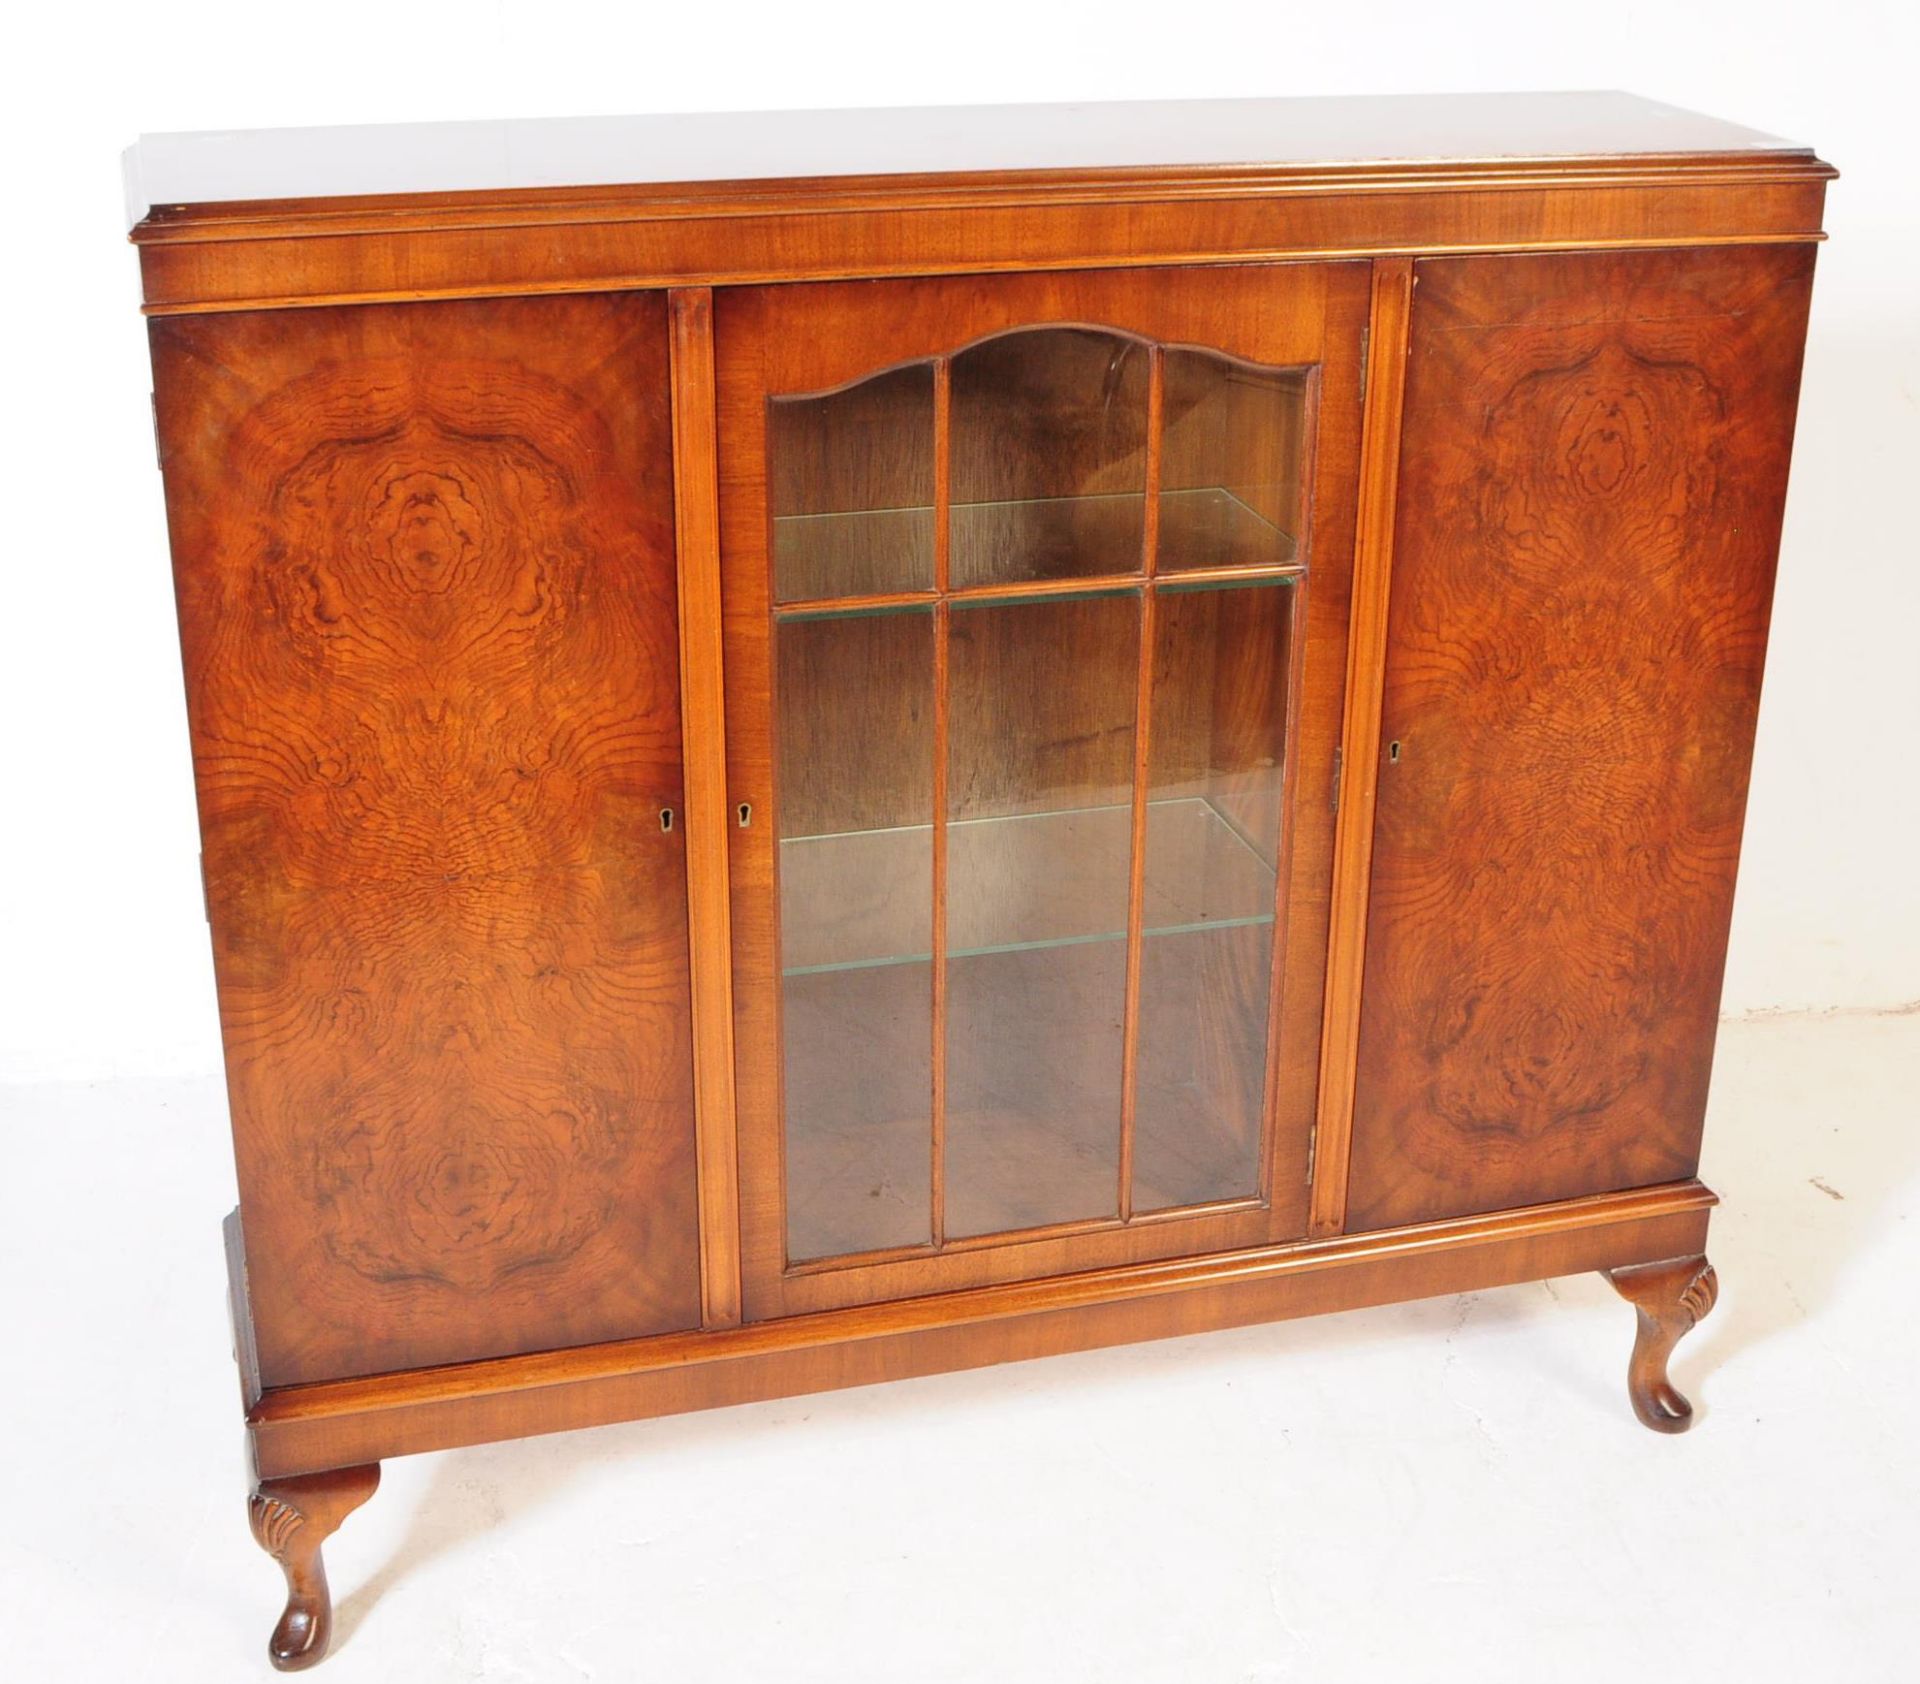 1940S QUEEN ANNE REVIVAL WALNUT BOOKCASE - Image 2 of 4